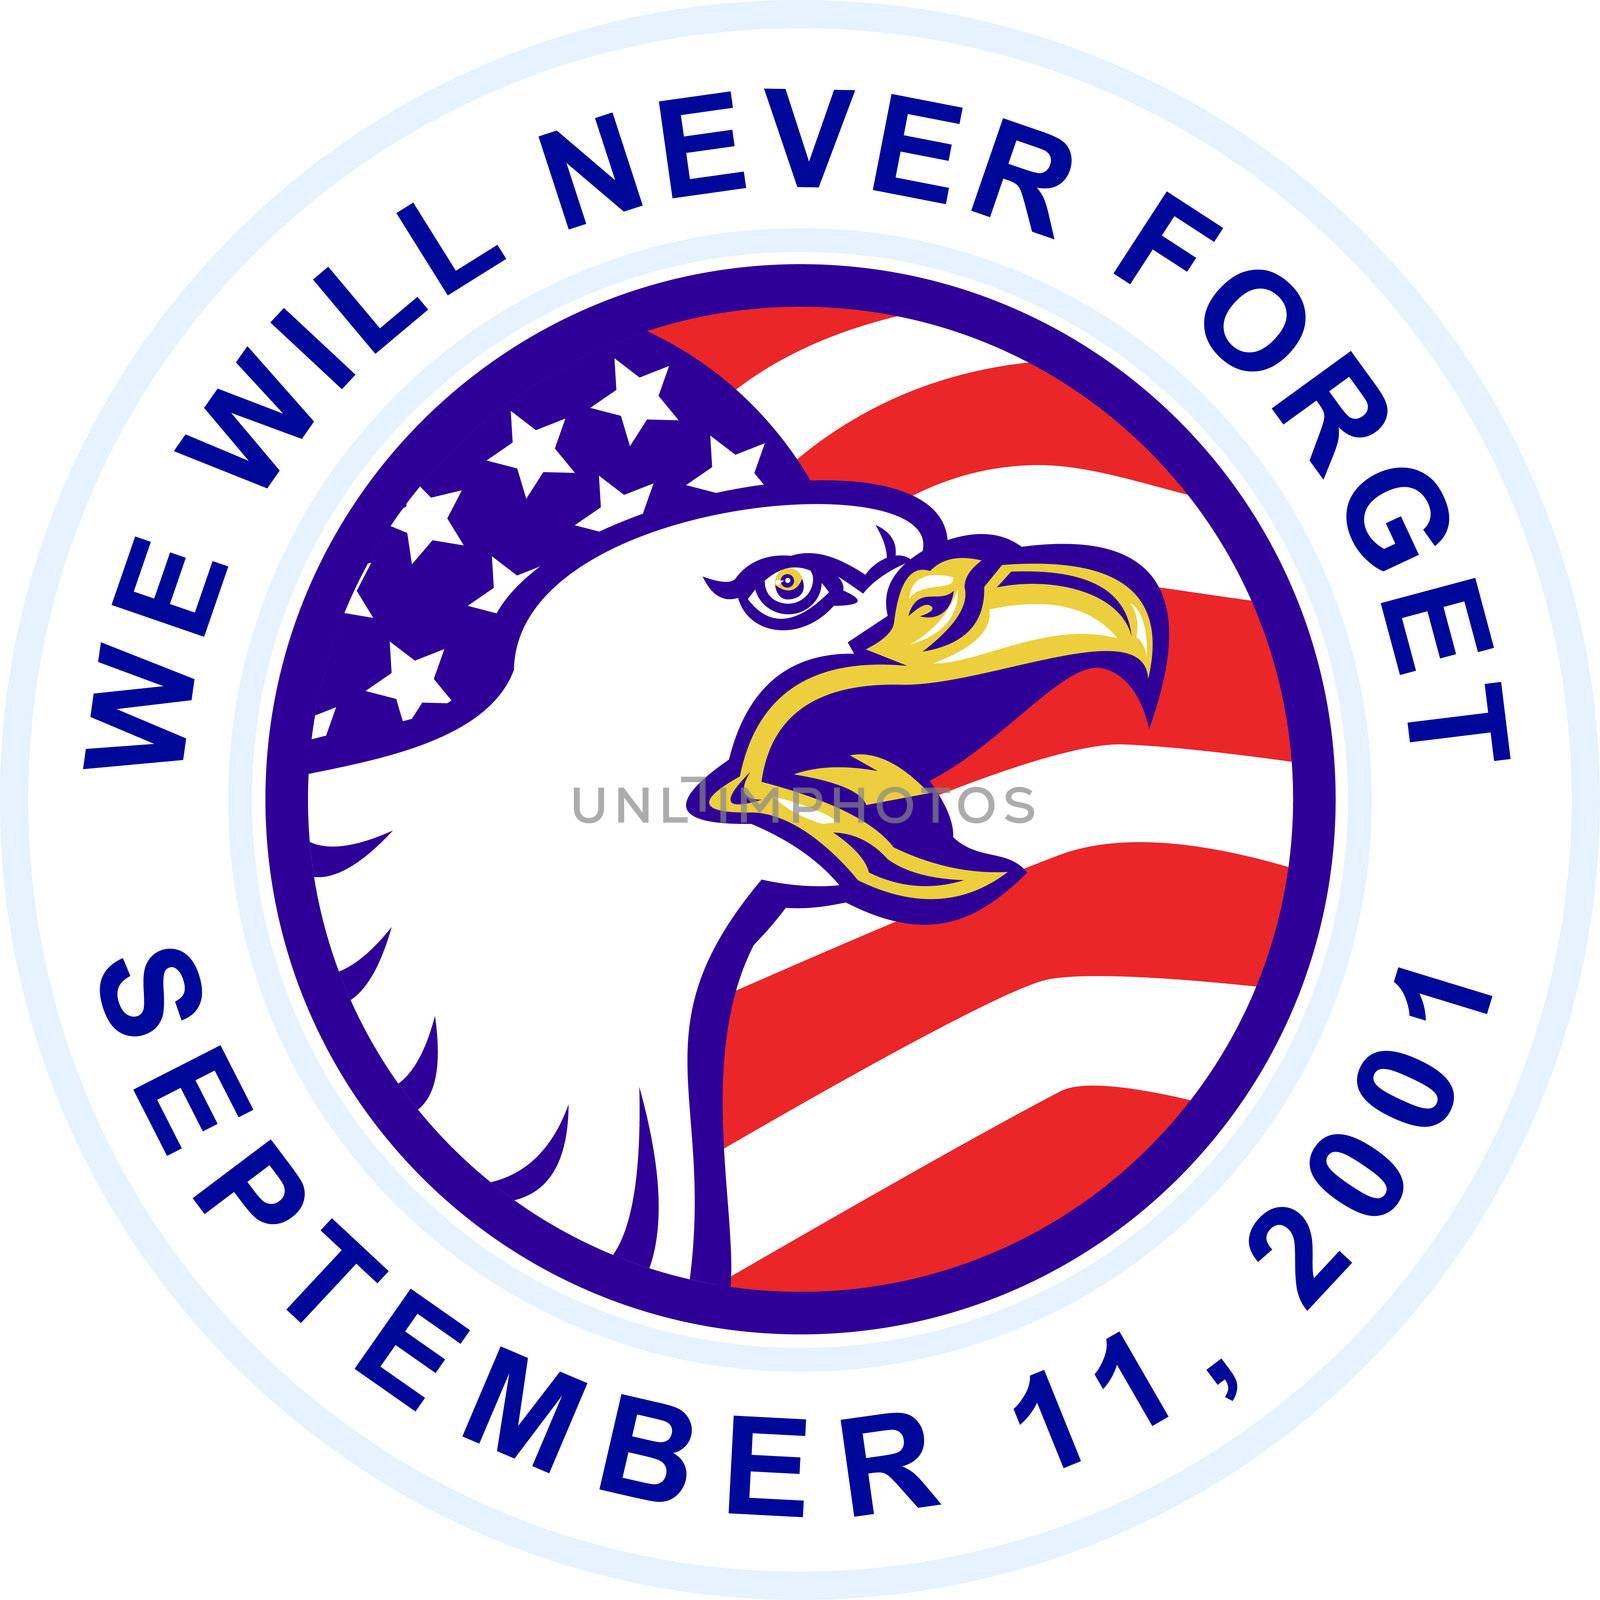 illustration of an American Bald eagle screaming with United States stars and stripe flag set inside circle with words "we will never forget September 11,2001"